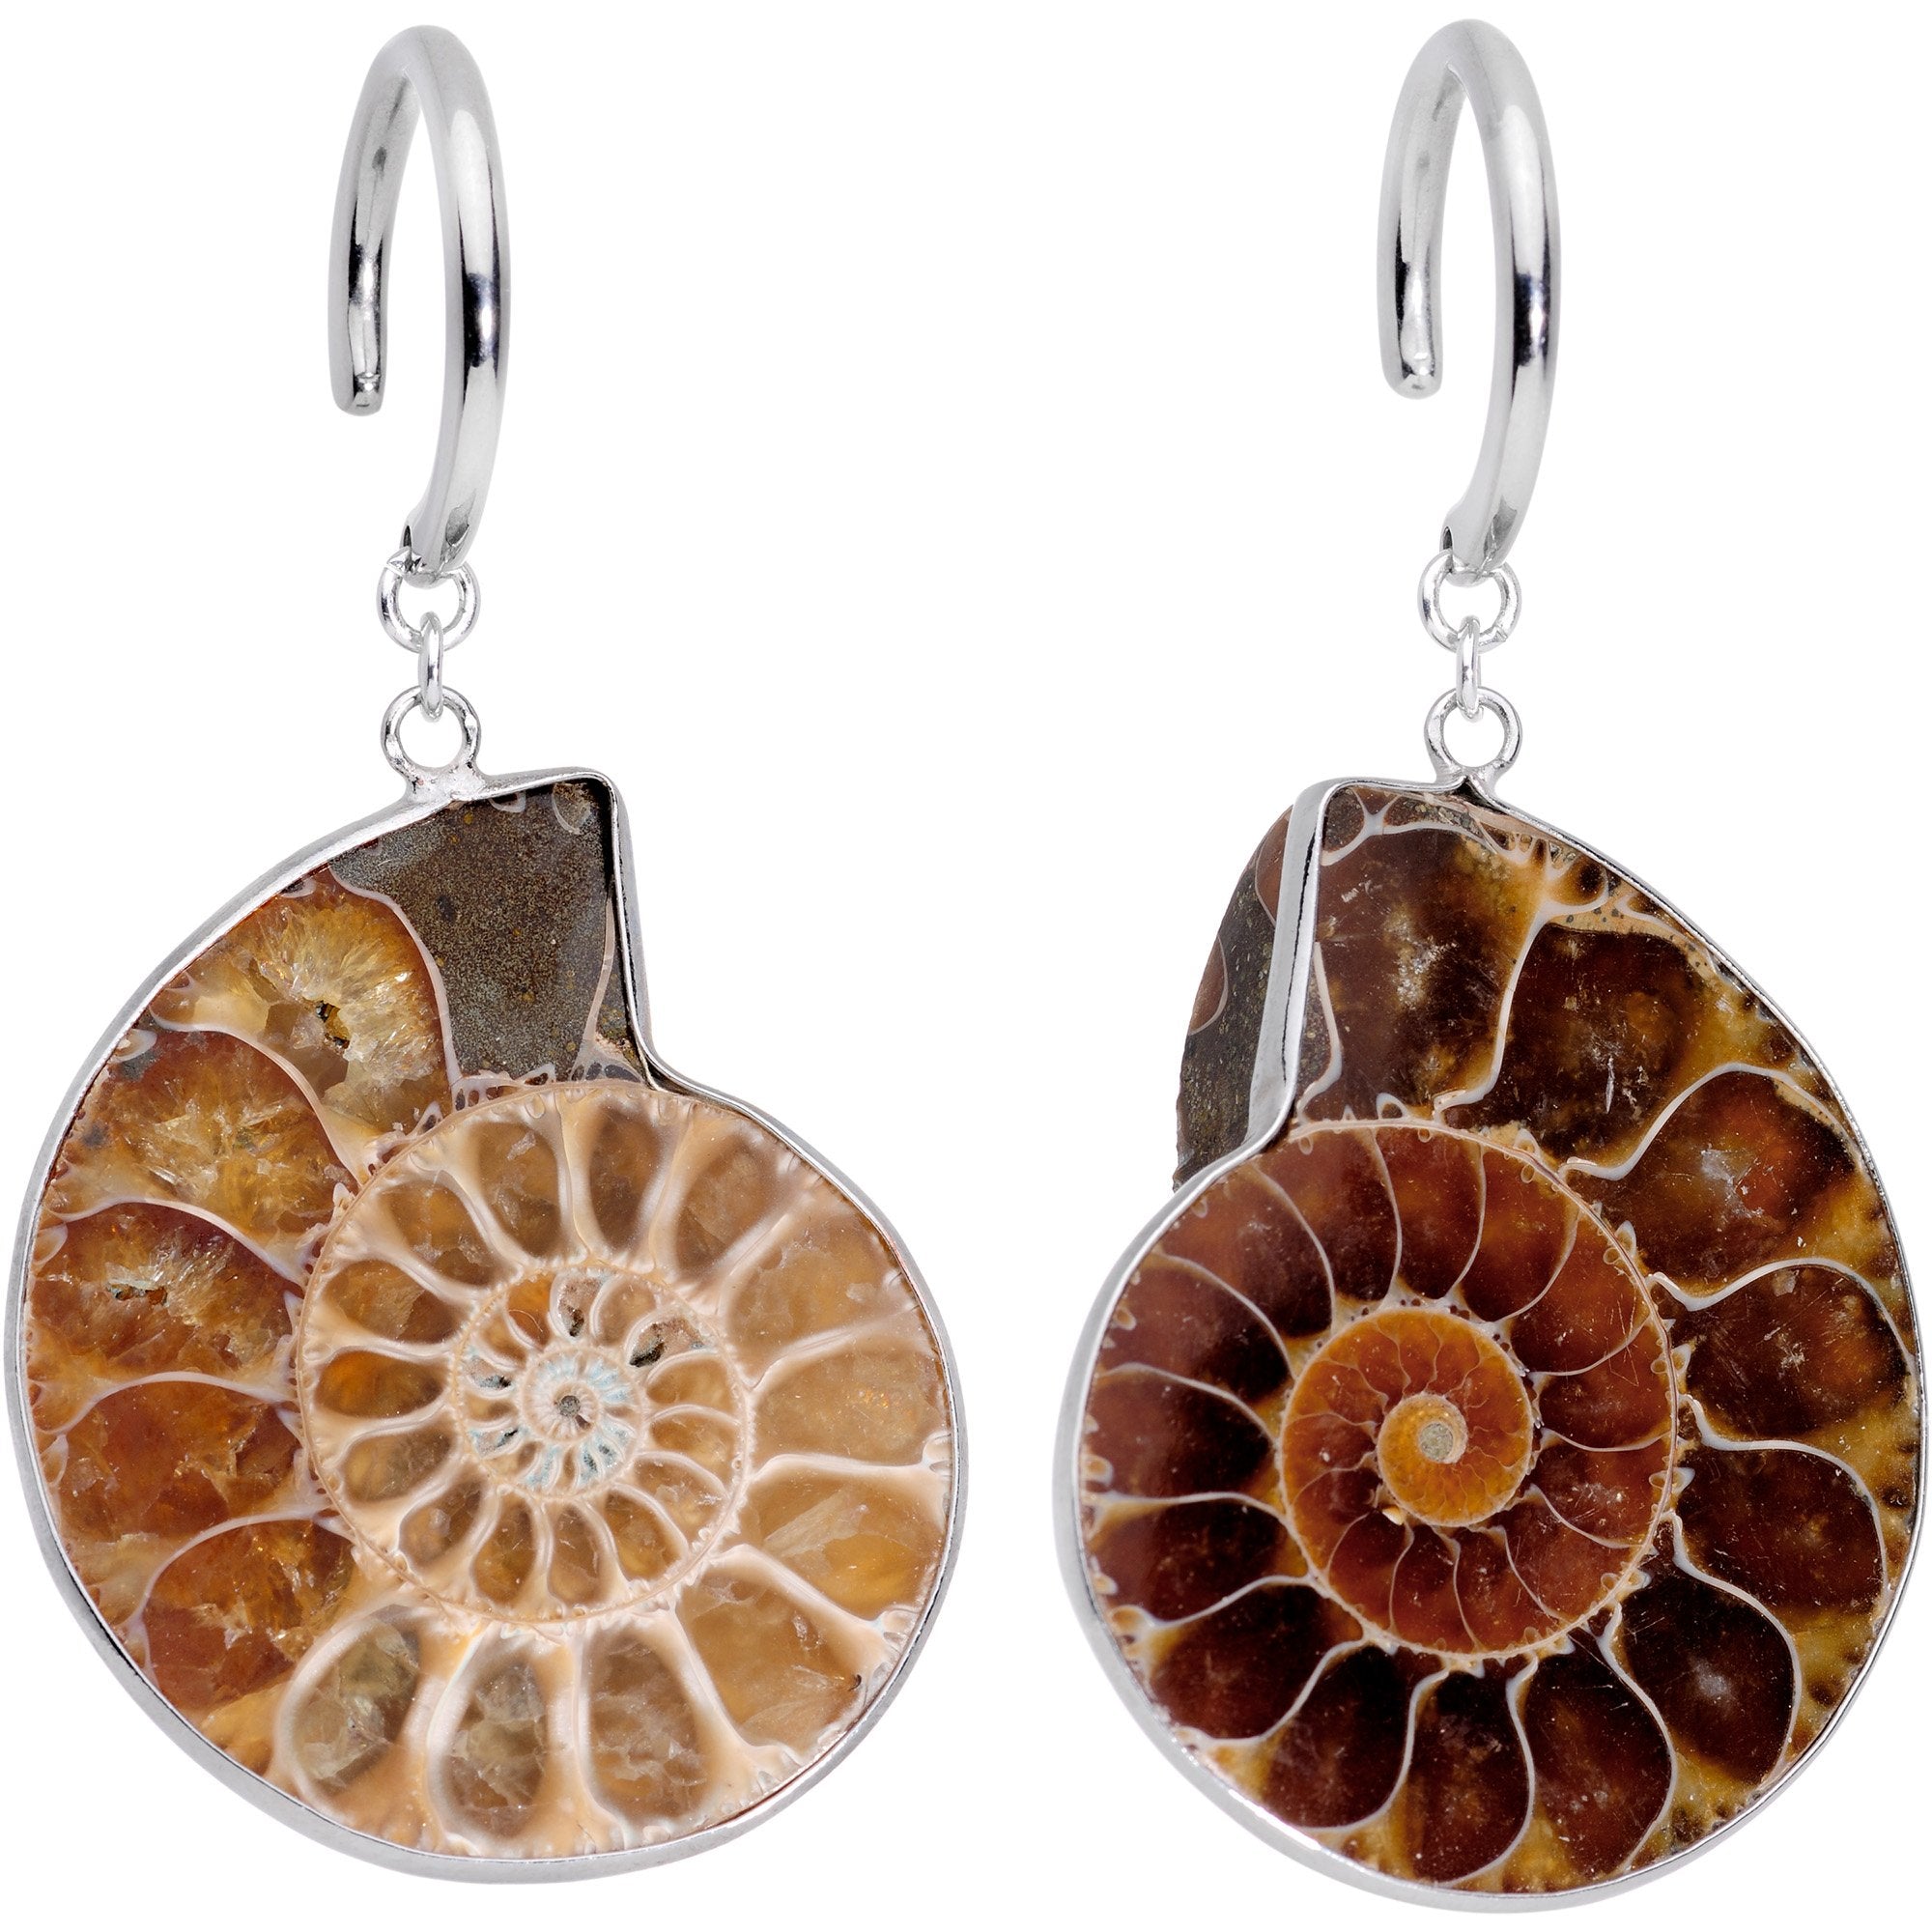 Handcrafted Spiral Ammonite Sea Fossil Ear Weights